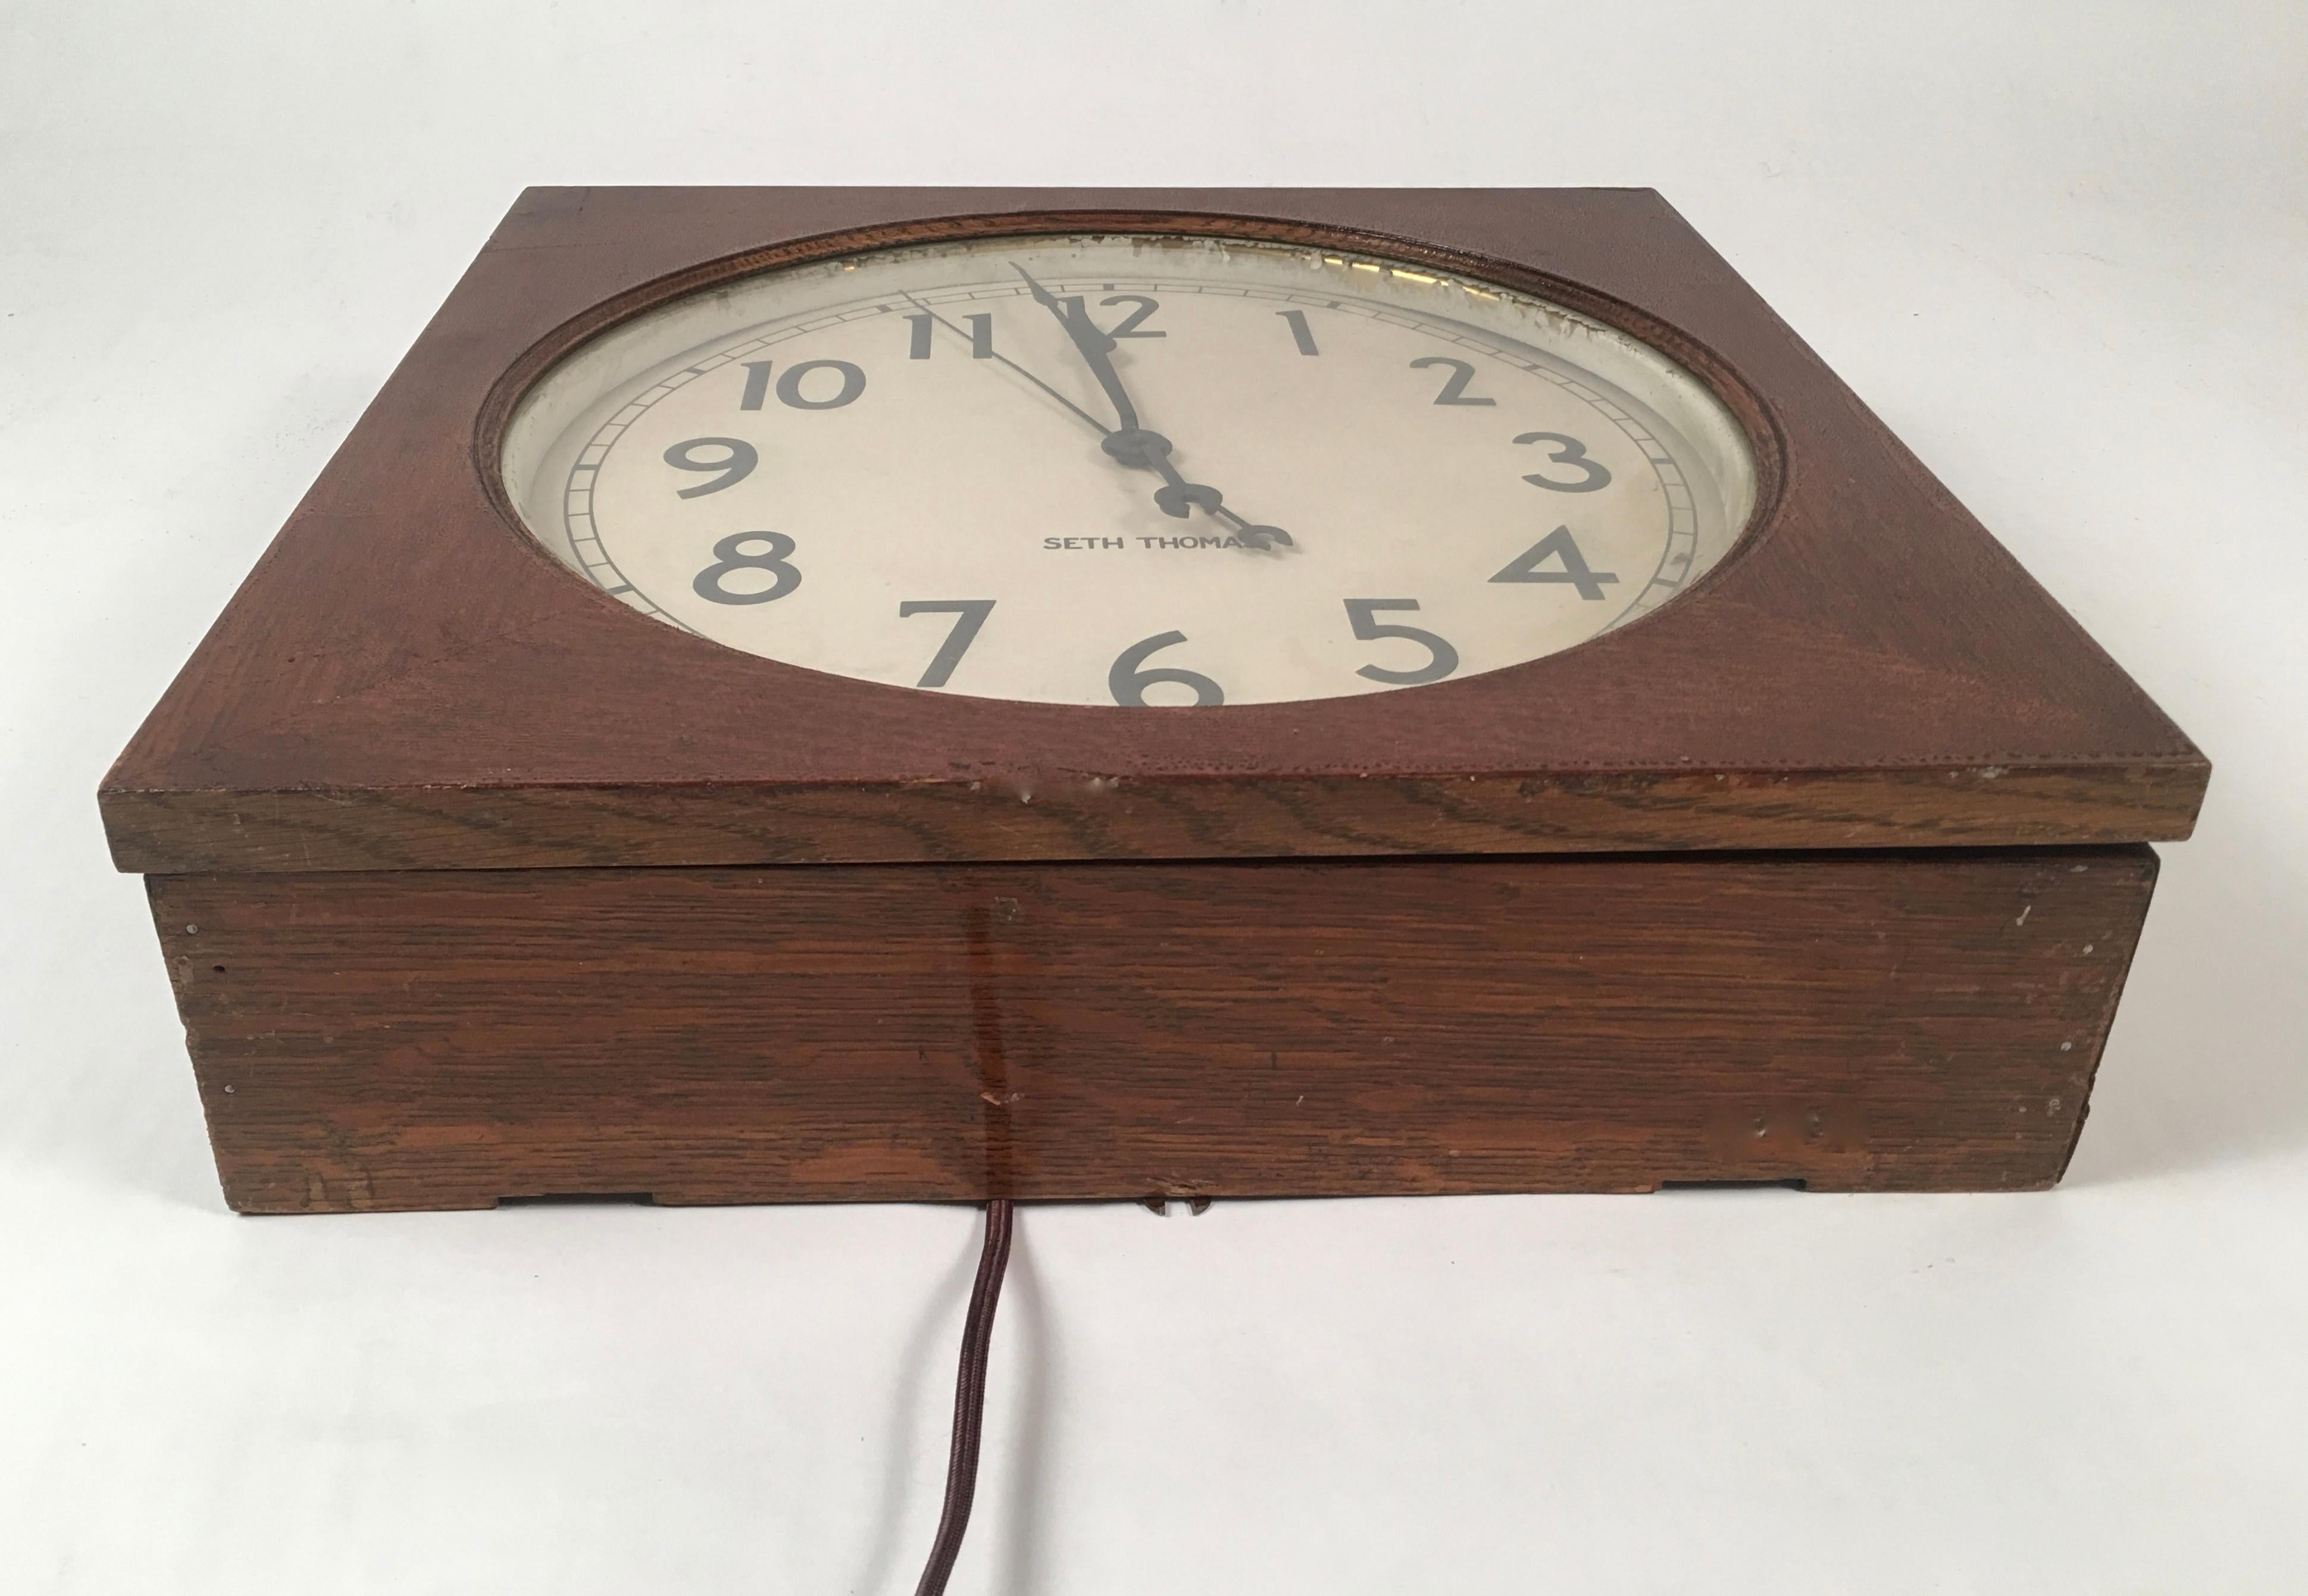 A Seth Thomas electric wall clock, the square case with its original varnished surface, now wonderfully leathery, with a hinged cover with a round glass window which opens up to the white painted metal dial with black numerals. Metal plaque inside